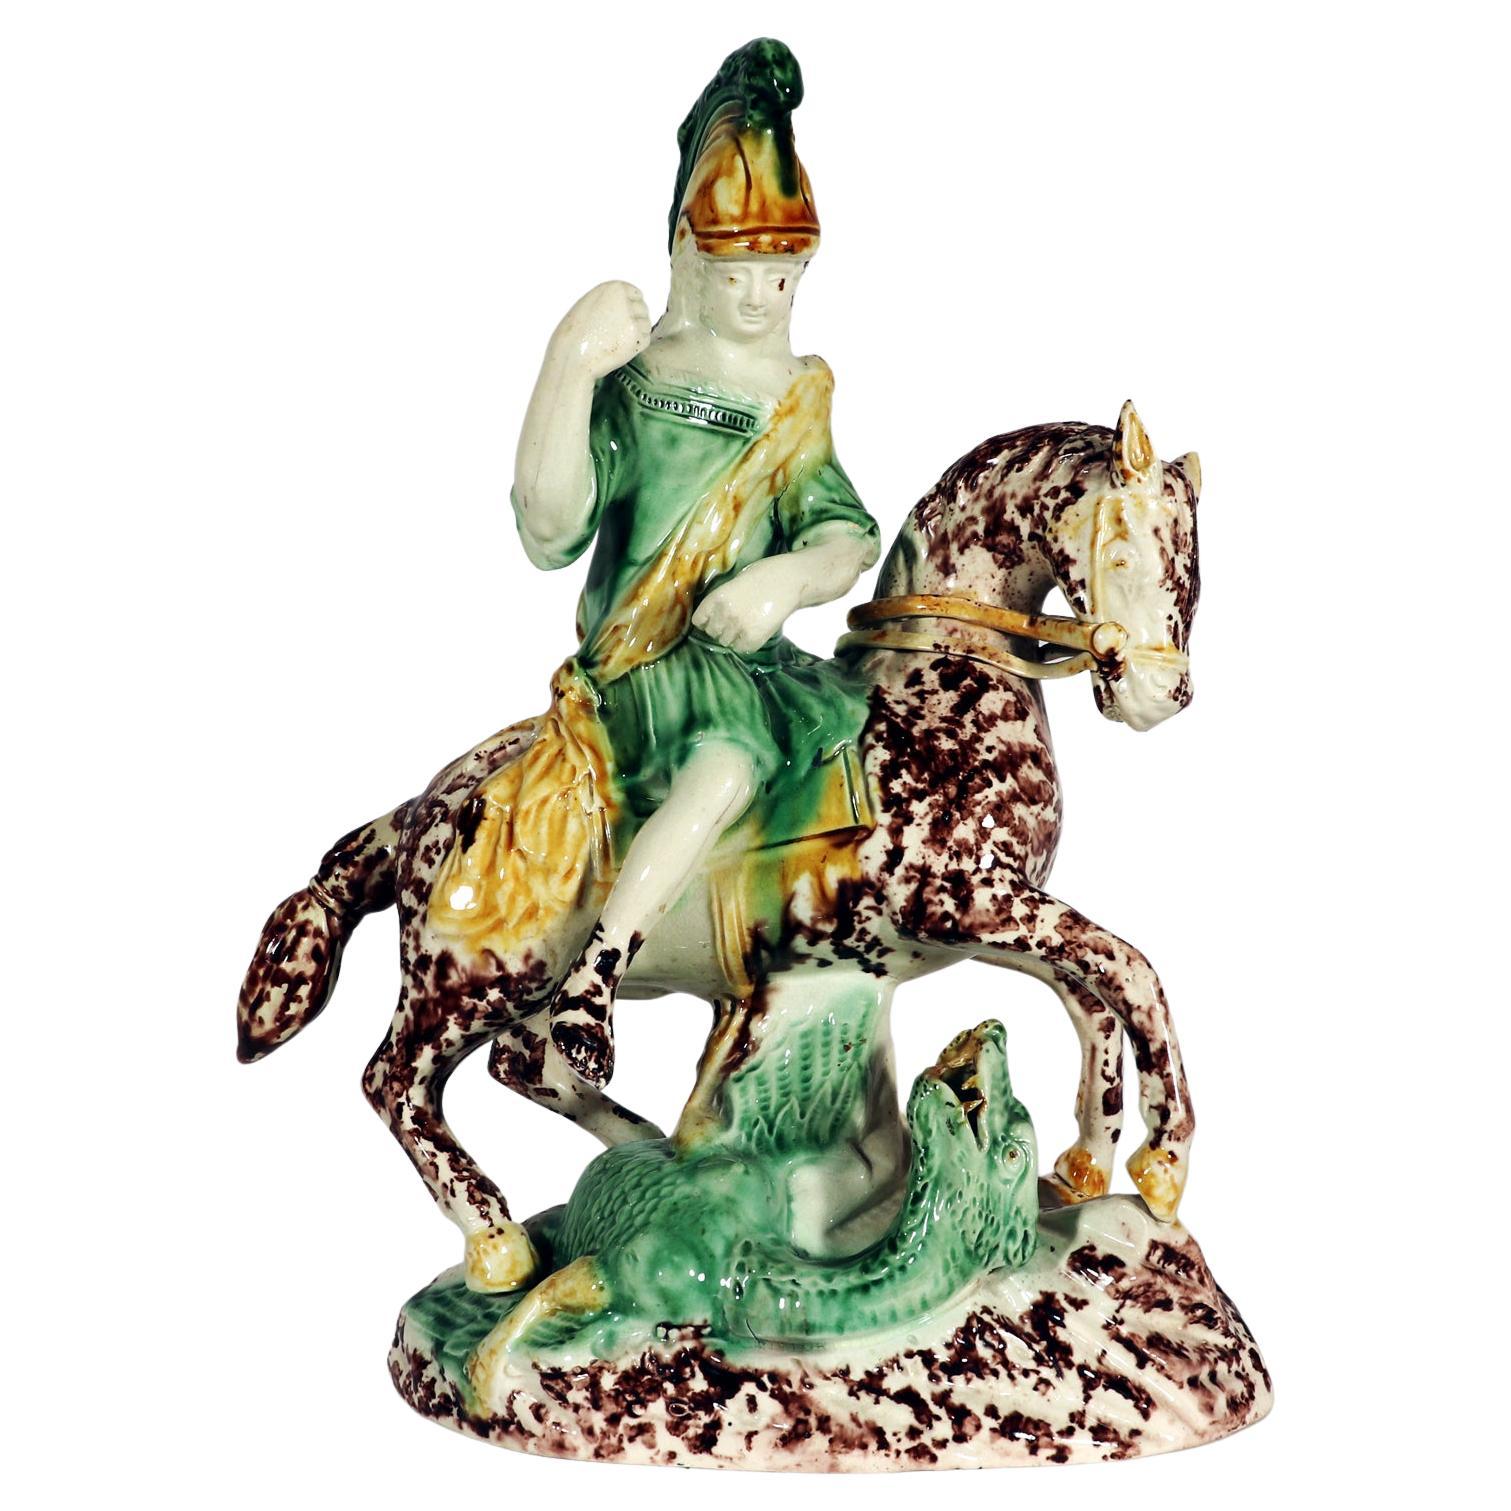 English Pottery Tortoise-shell Creamware Figure of St. George Fighting the Dragon,
Staffordshire, 
Possibly modelled by Enoch and Ralph Wood,
 Late 18th Century. 

The earthenware figure depicts St. George and the Dragon. St. George is on